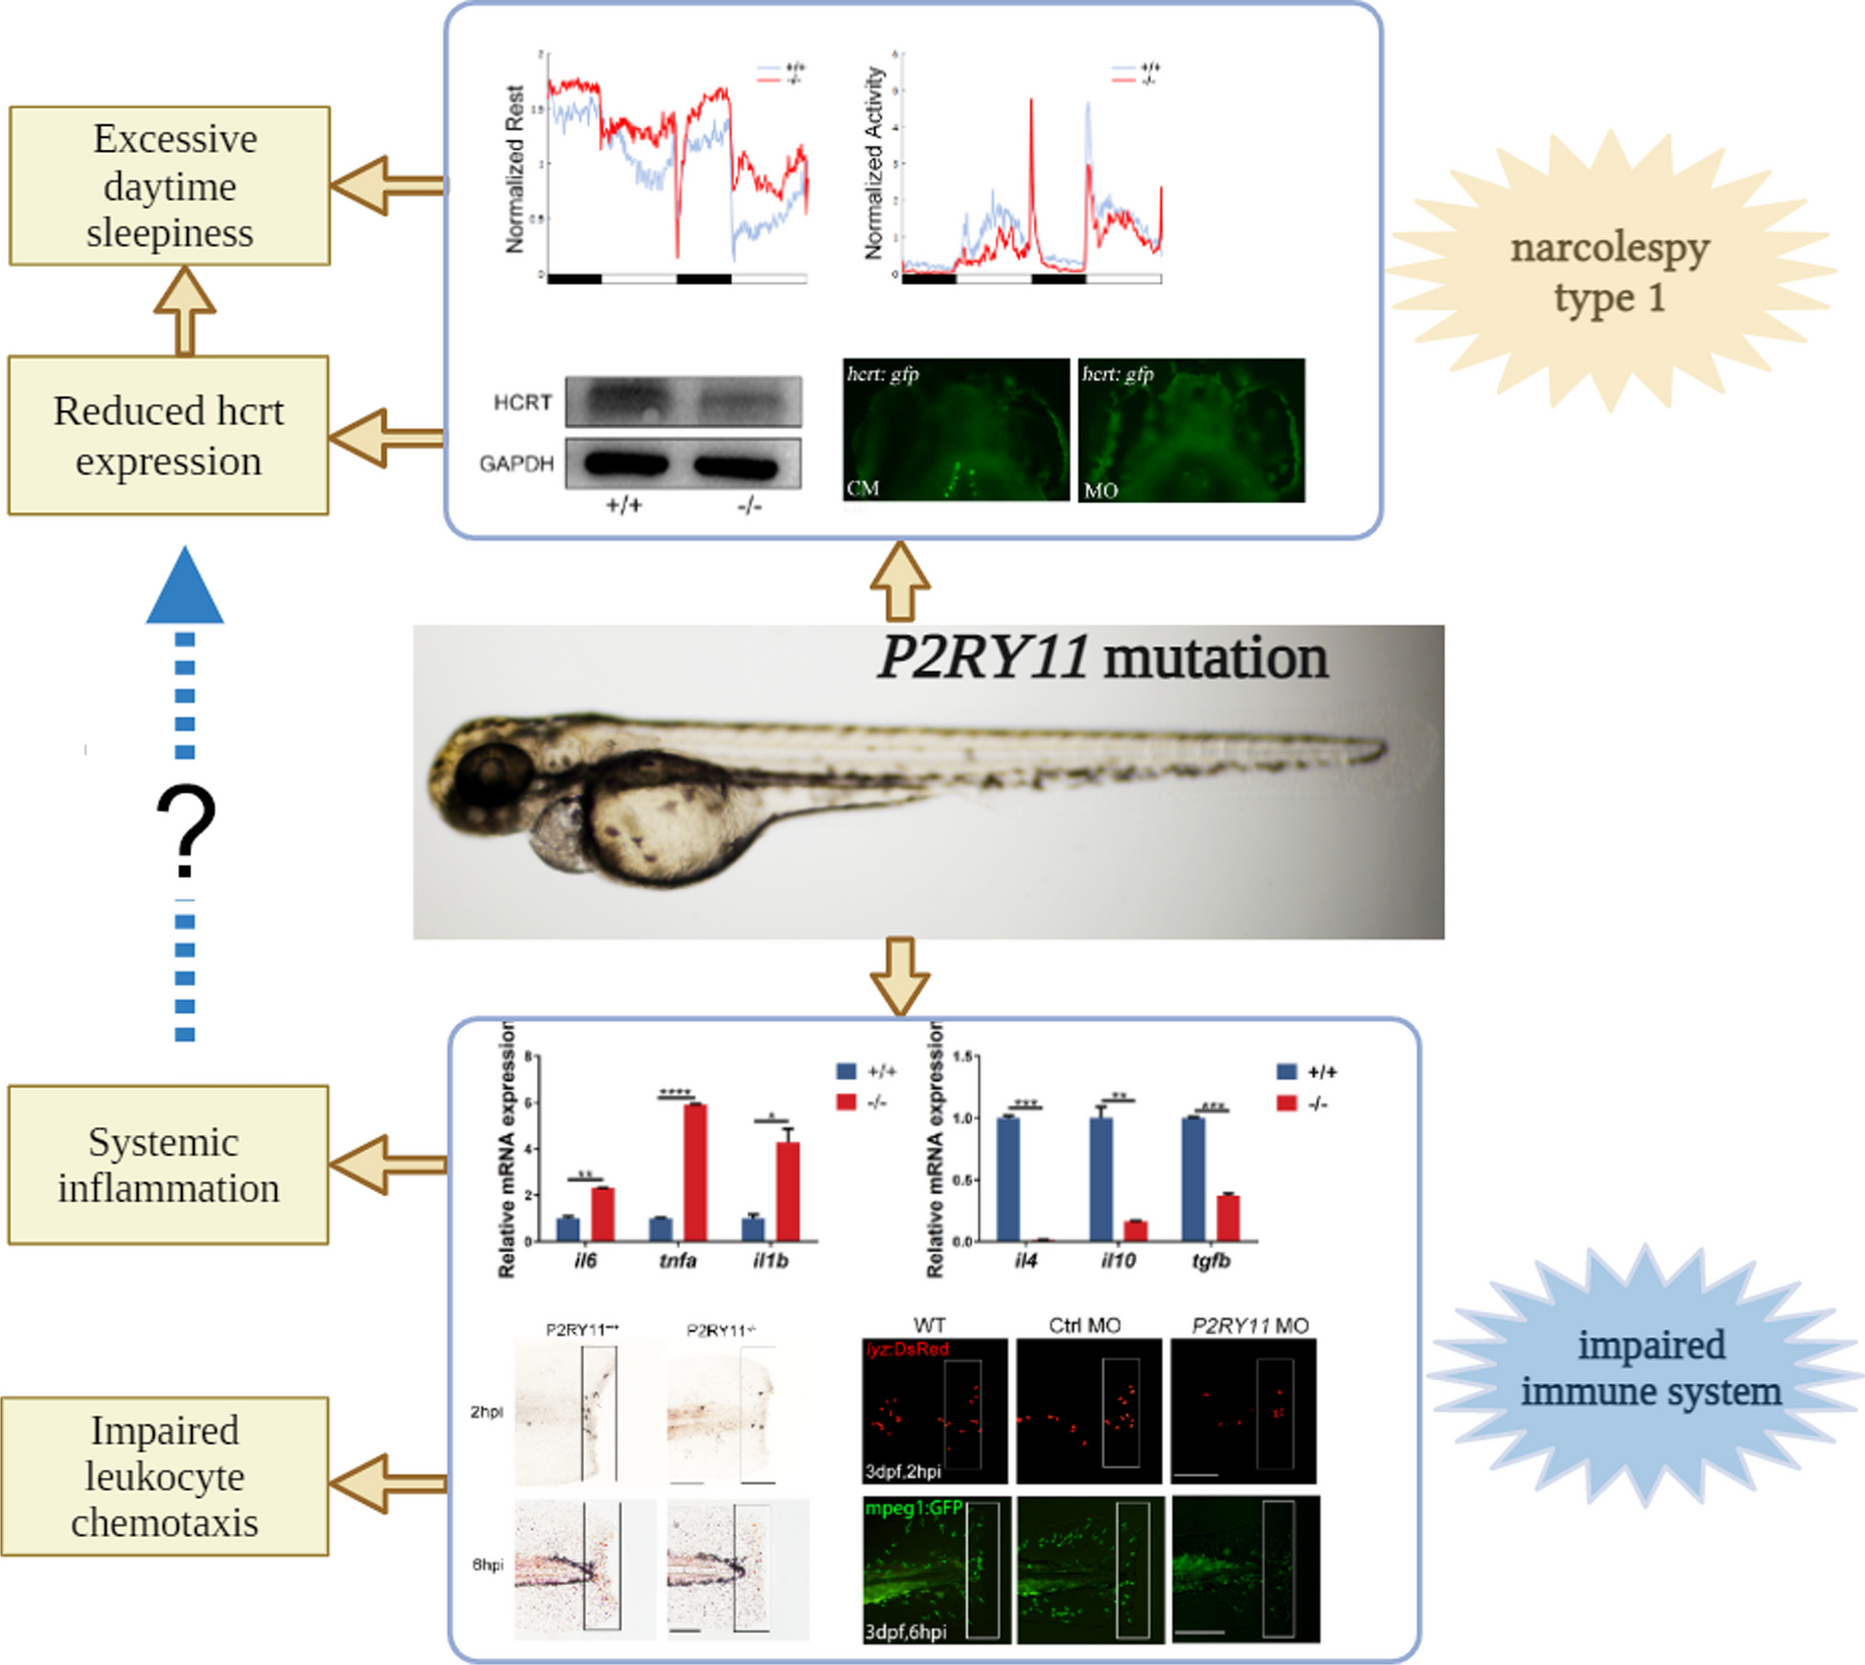 Deficiency of P2RY11 causes narcolepsy and attenuates the recruitment of neutrophils and macrophages in the inflammatory response in zebrafish